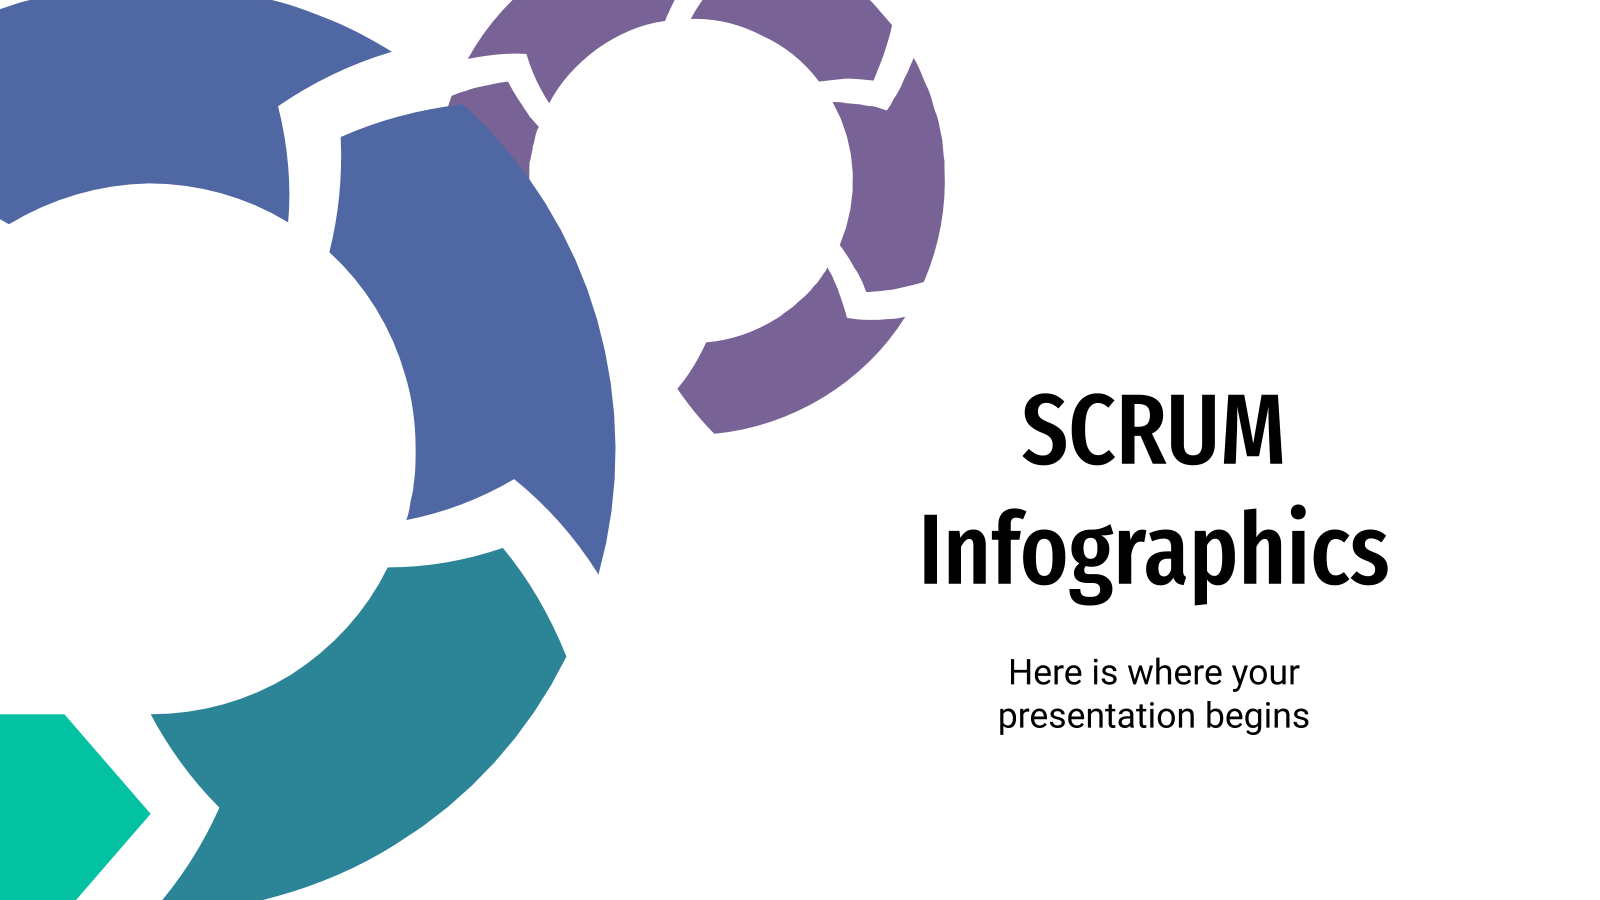 SCRUM Infographics for Google Slides & PowerPoint